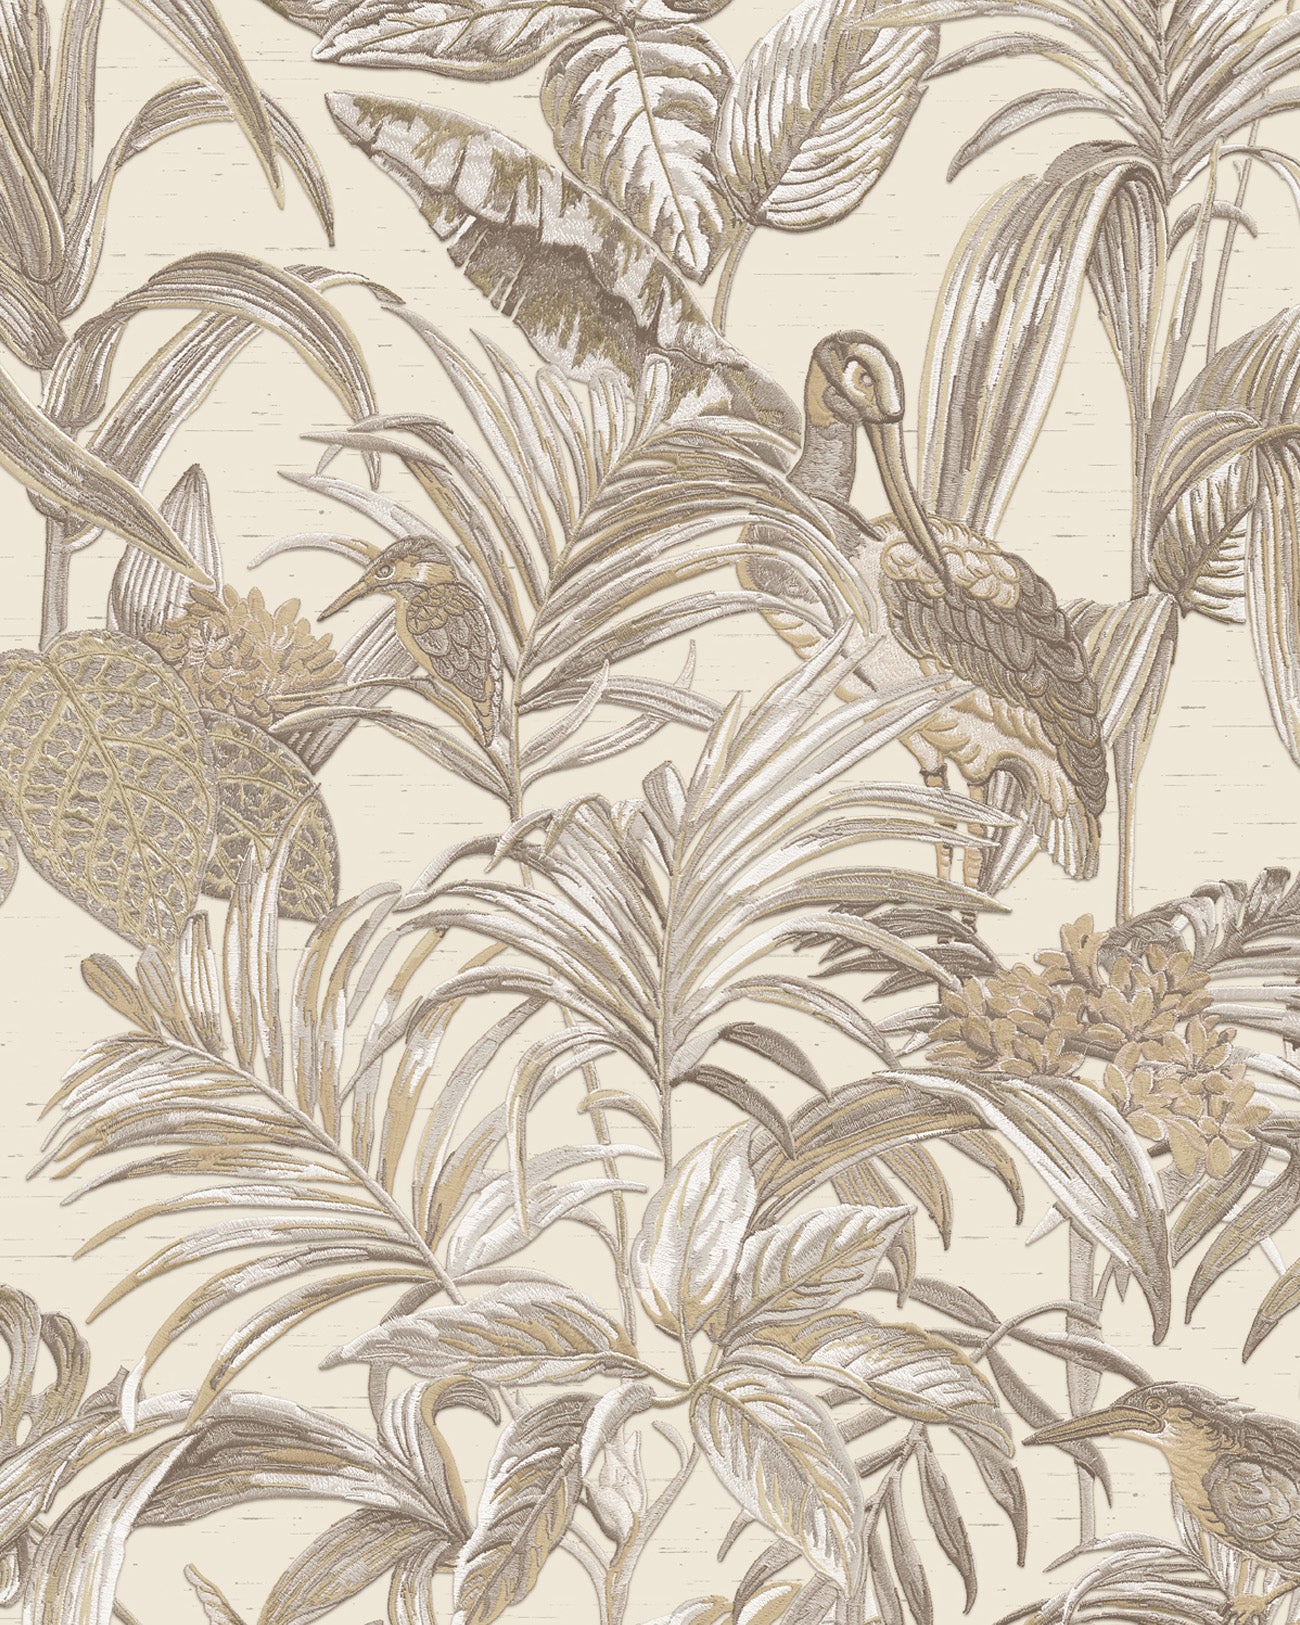 Moitf bird wallpaper Profhome DE120012-DI hot embossed non-woven wallpaper embossed with an exotic design shiny ivory white-cream bronze 5.33 m2